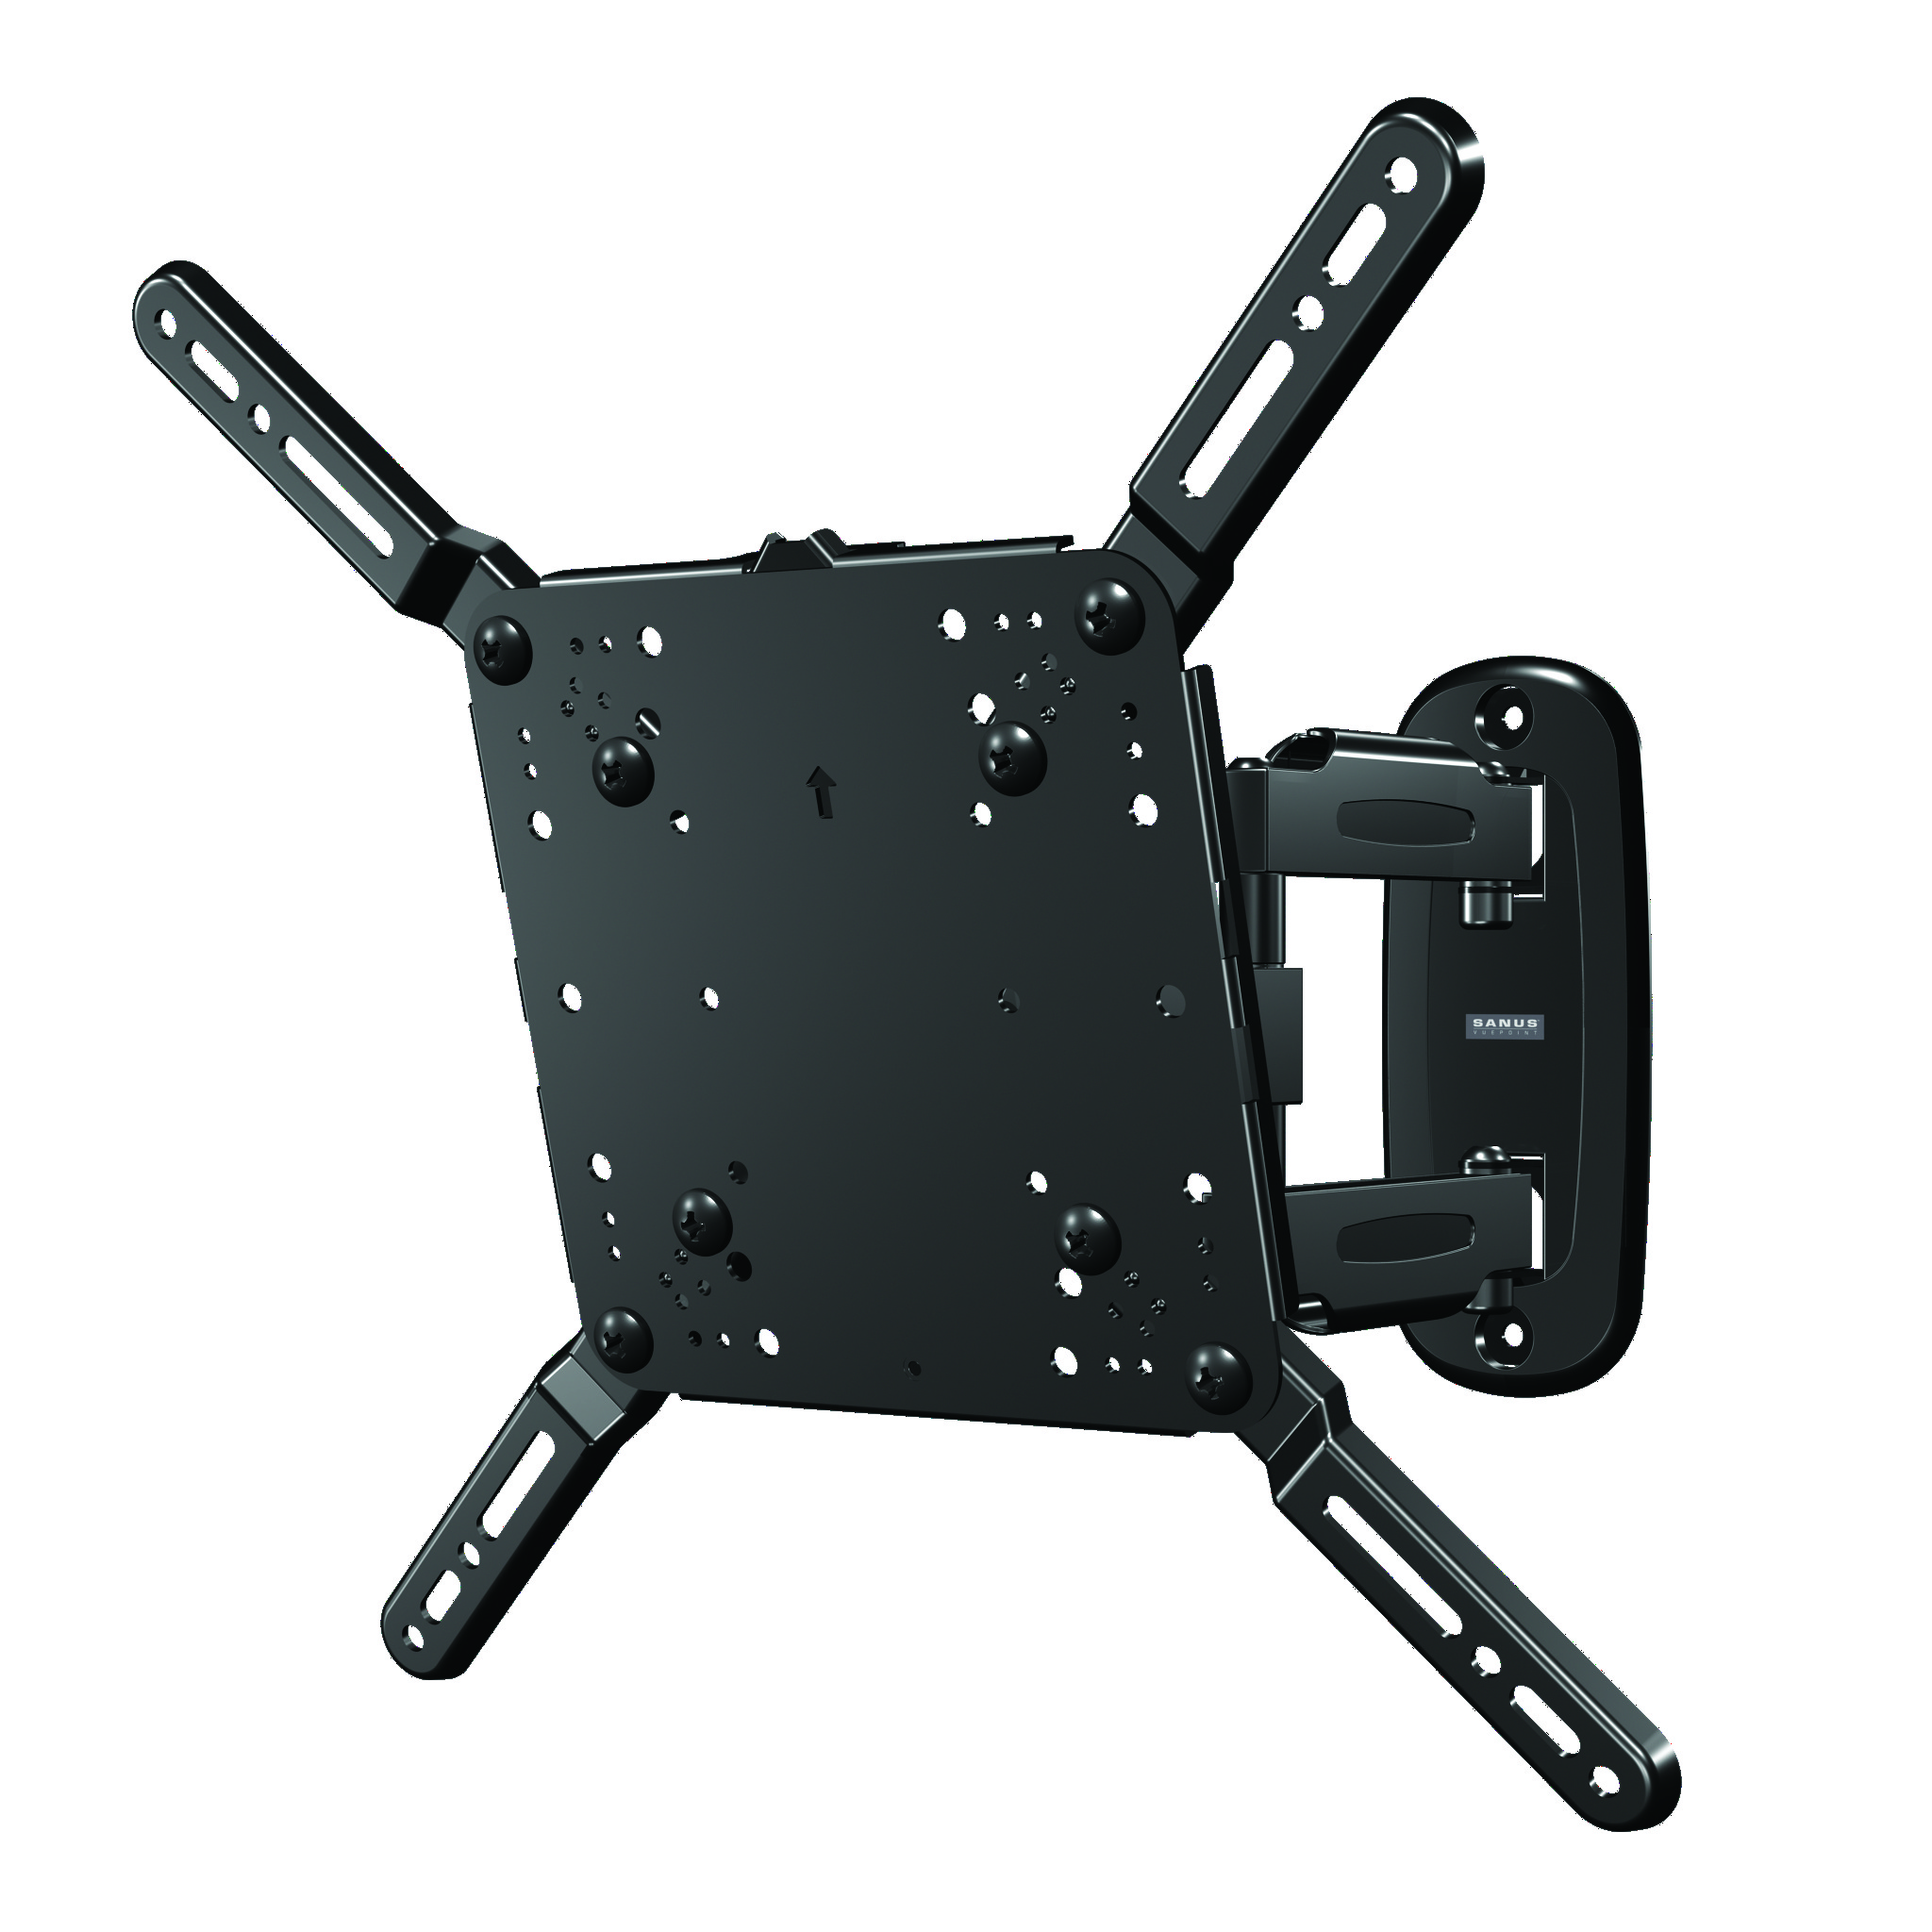 SANUS Full-Motion TV Mount for 32"-55" w/ cable tunnels & 10' HDMI - image 1 of 7